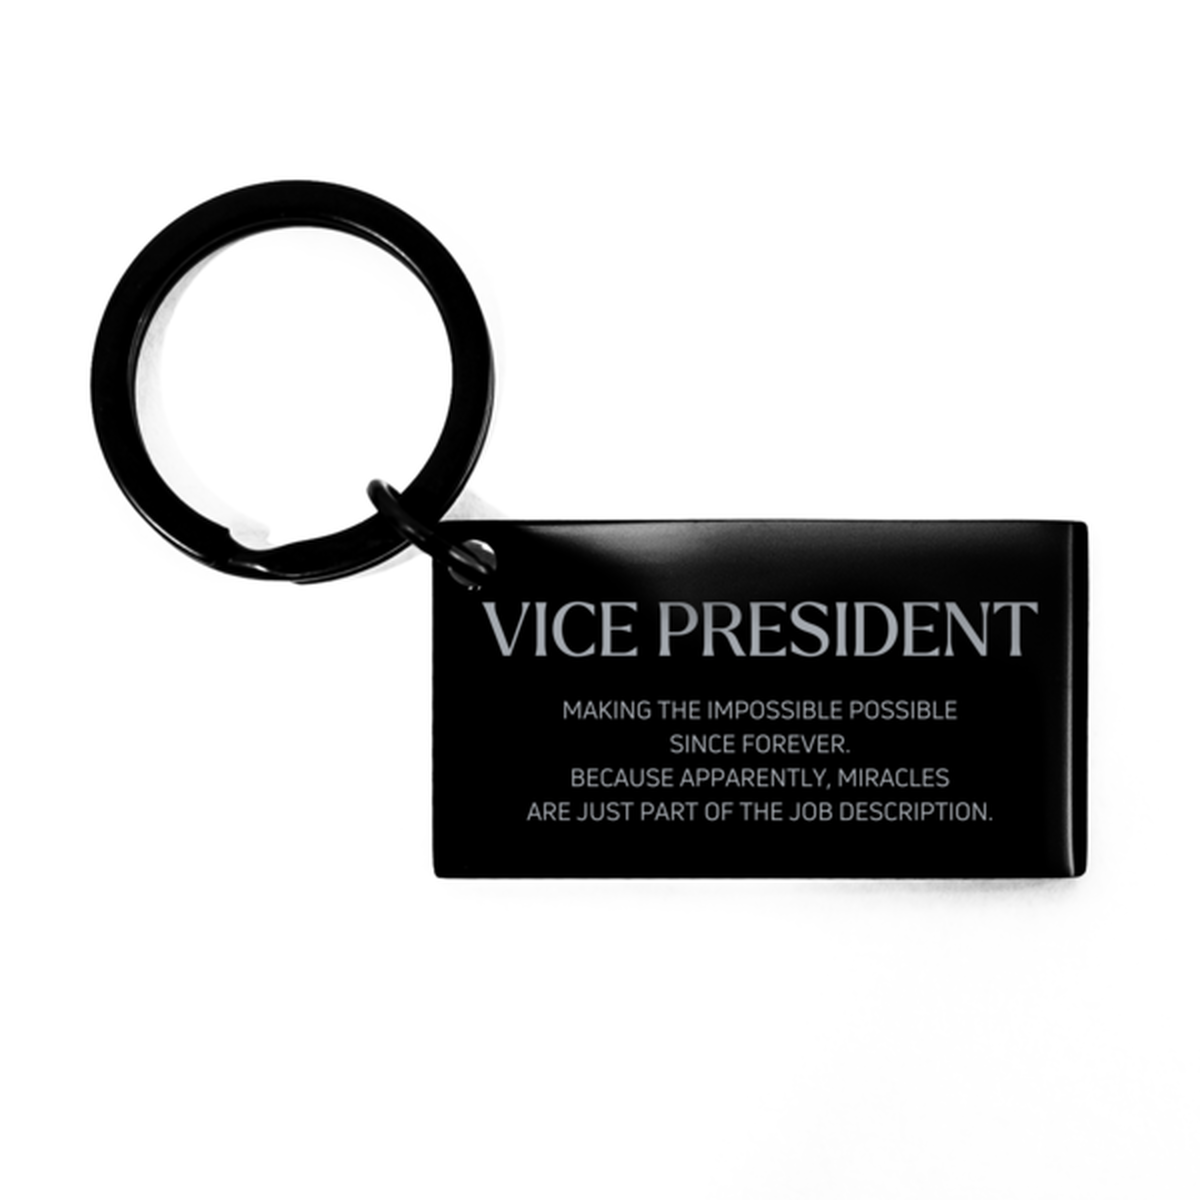 Funny Vice President Gifts, Miracles are just part of the job description, Inspirational Birthday Keychain For Vice President, Men, Women, Coworkers, Friends, Boss